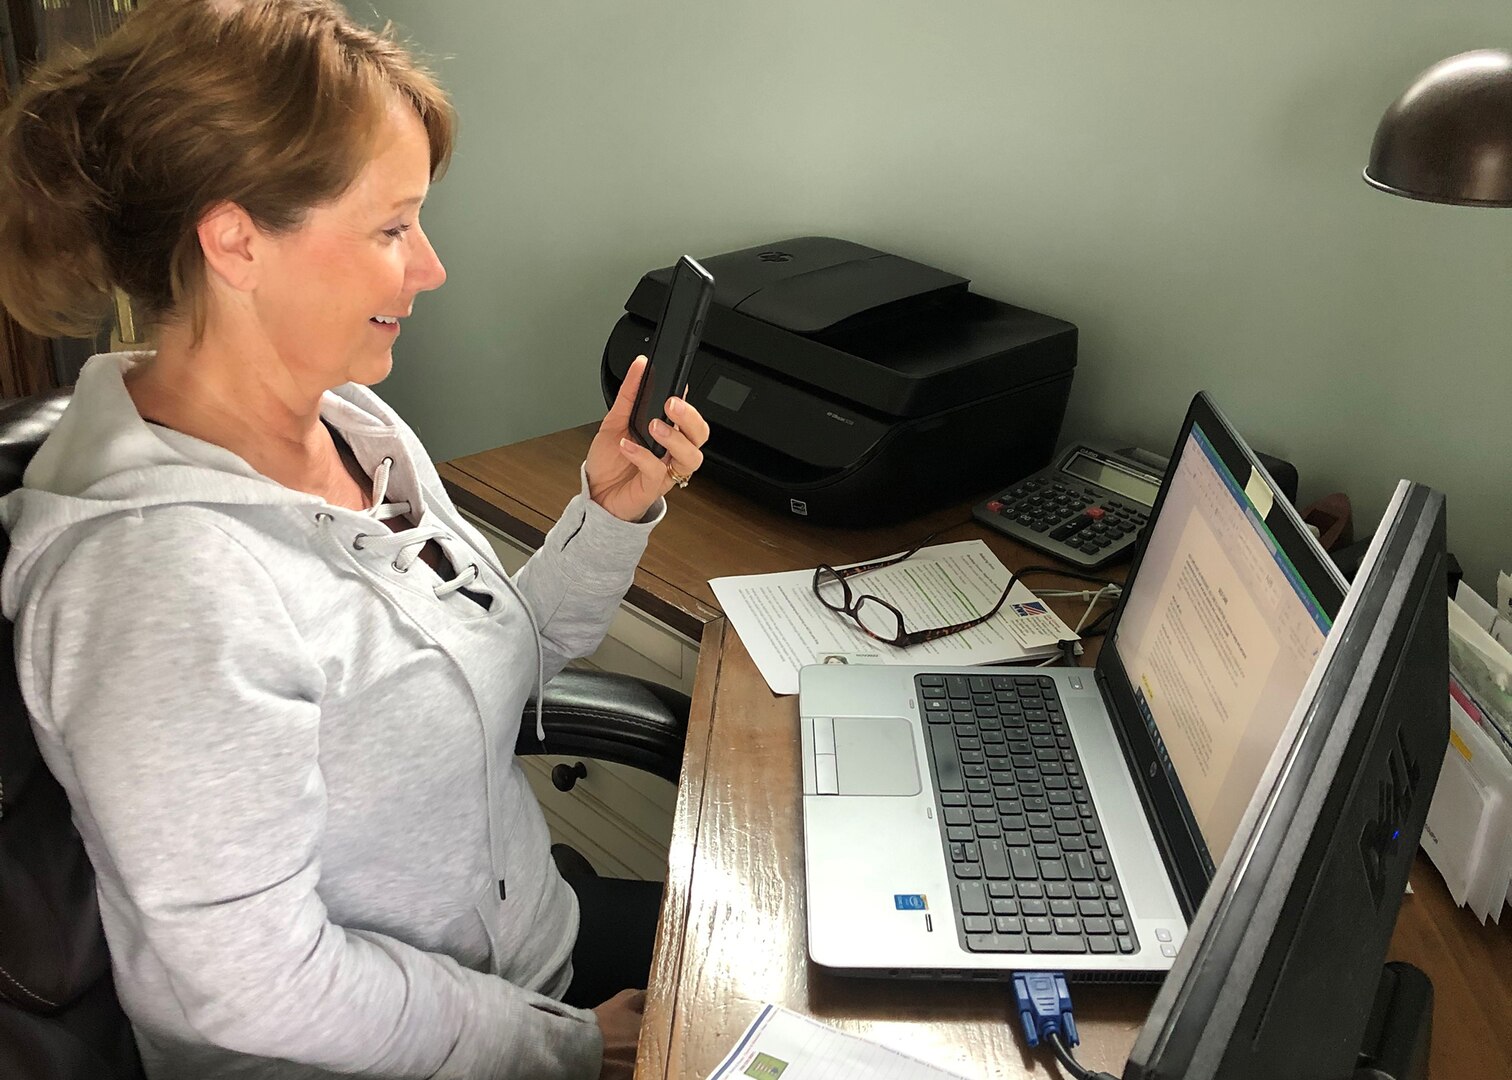 Family Program Manager Lisa Grenon makes the weekly call to her virtual support group to help those struggling with their stress that comes from coping with the pandemic.